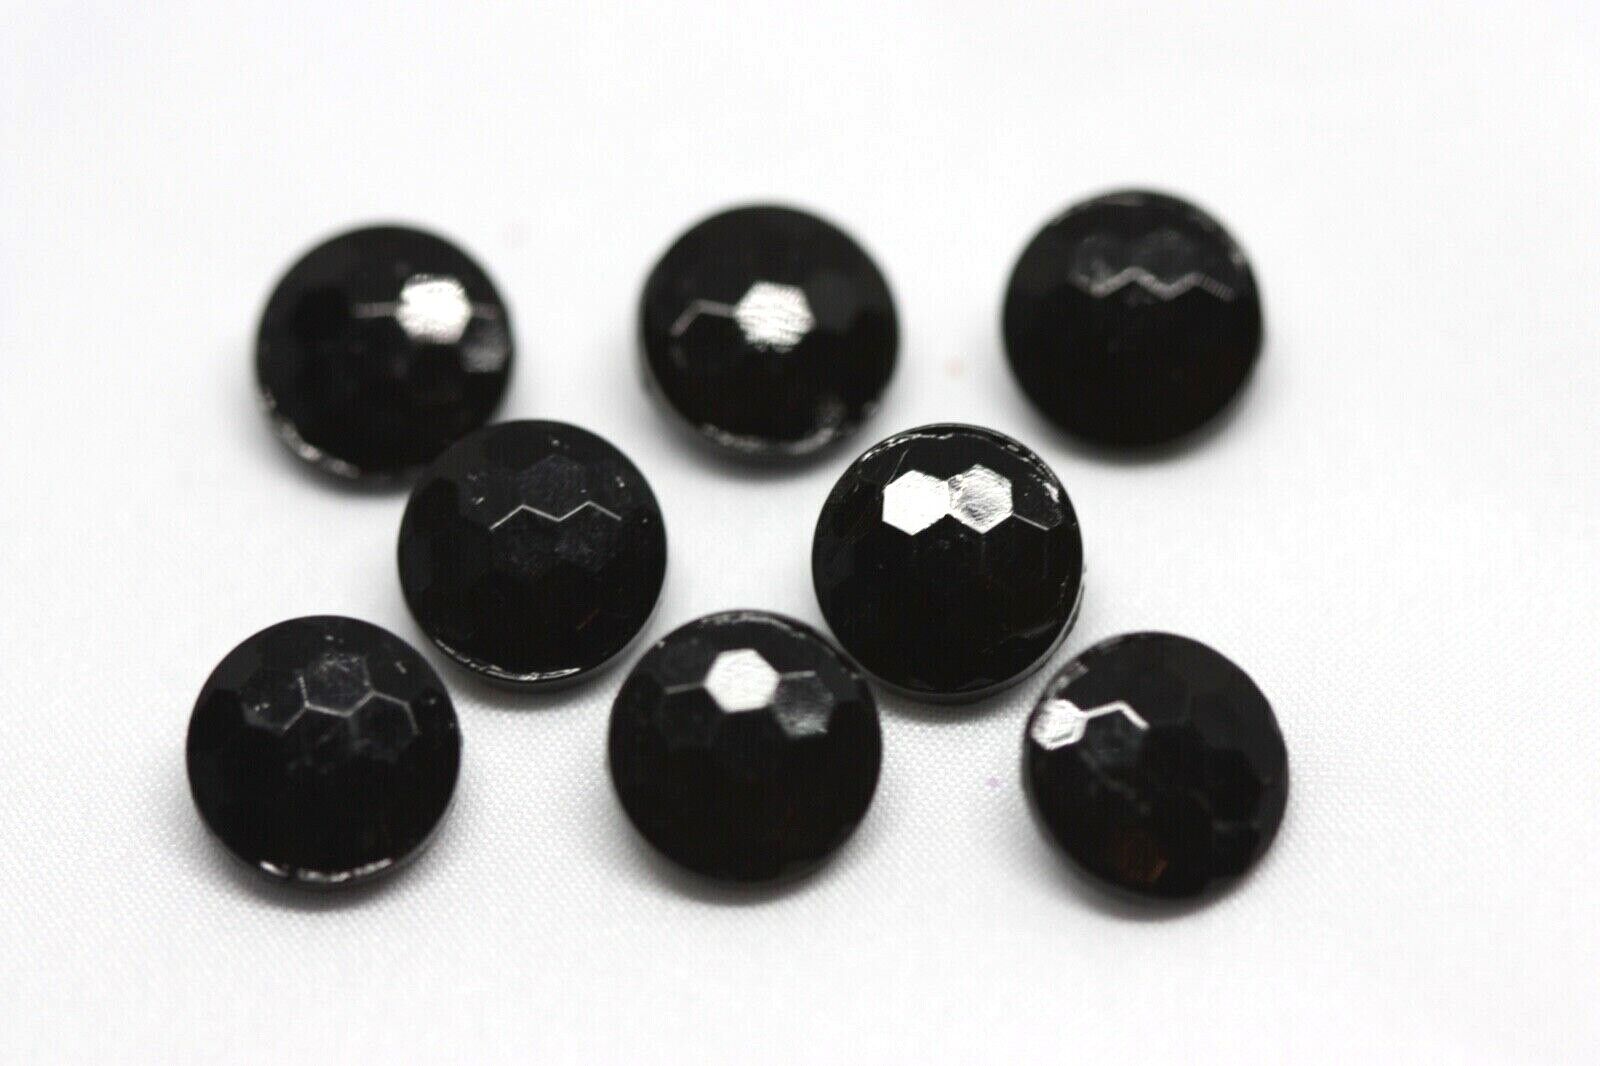 8 Vintage Le Chic Black Glass Honeycomb Buttons Round Faceted Jet Mourning Без бренда - фотография #7